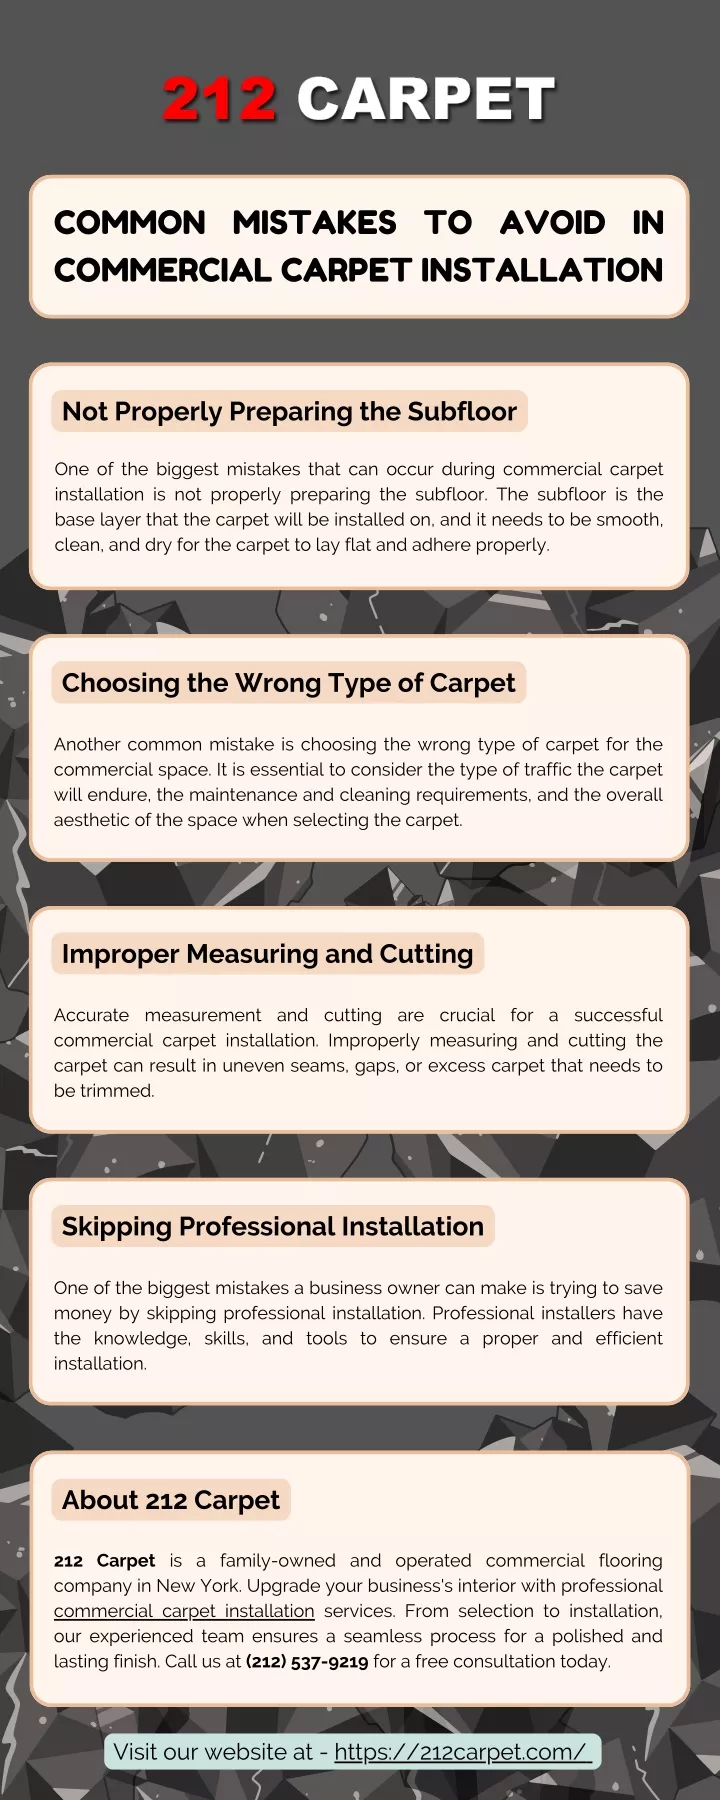 common mistakes to avoid in commercial carpet